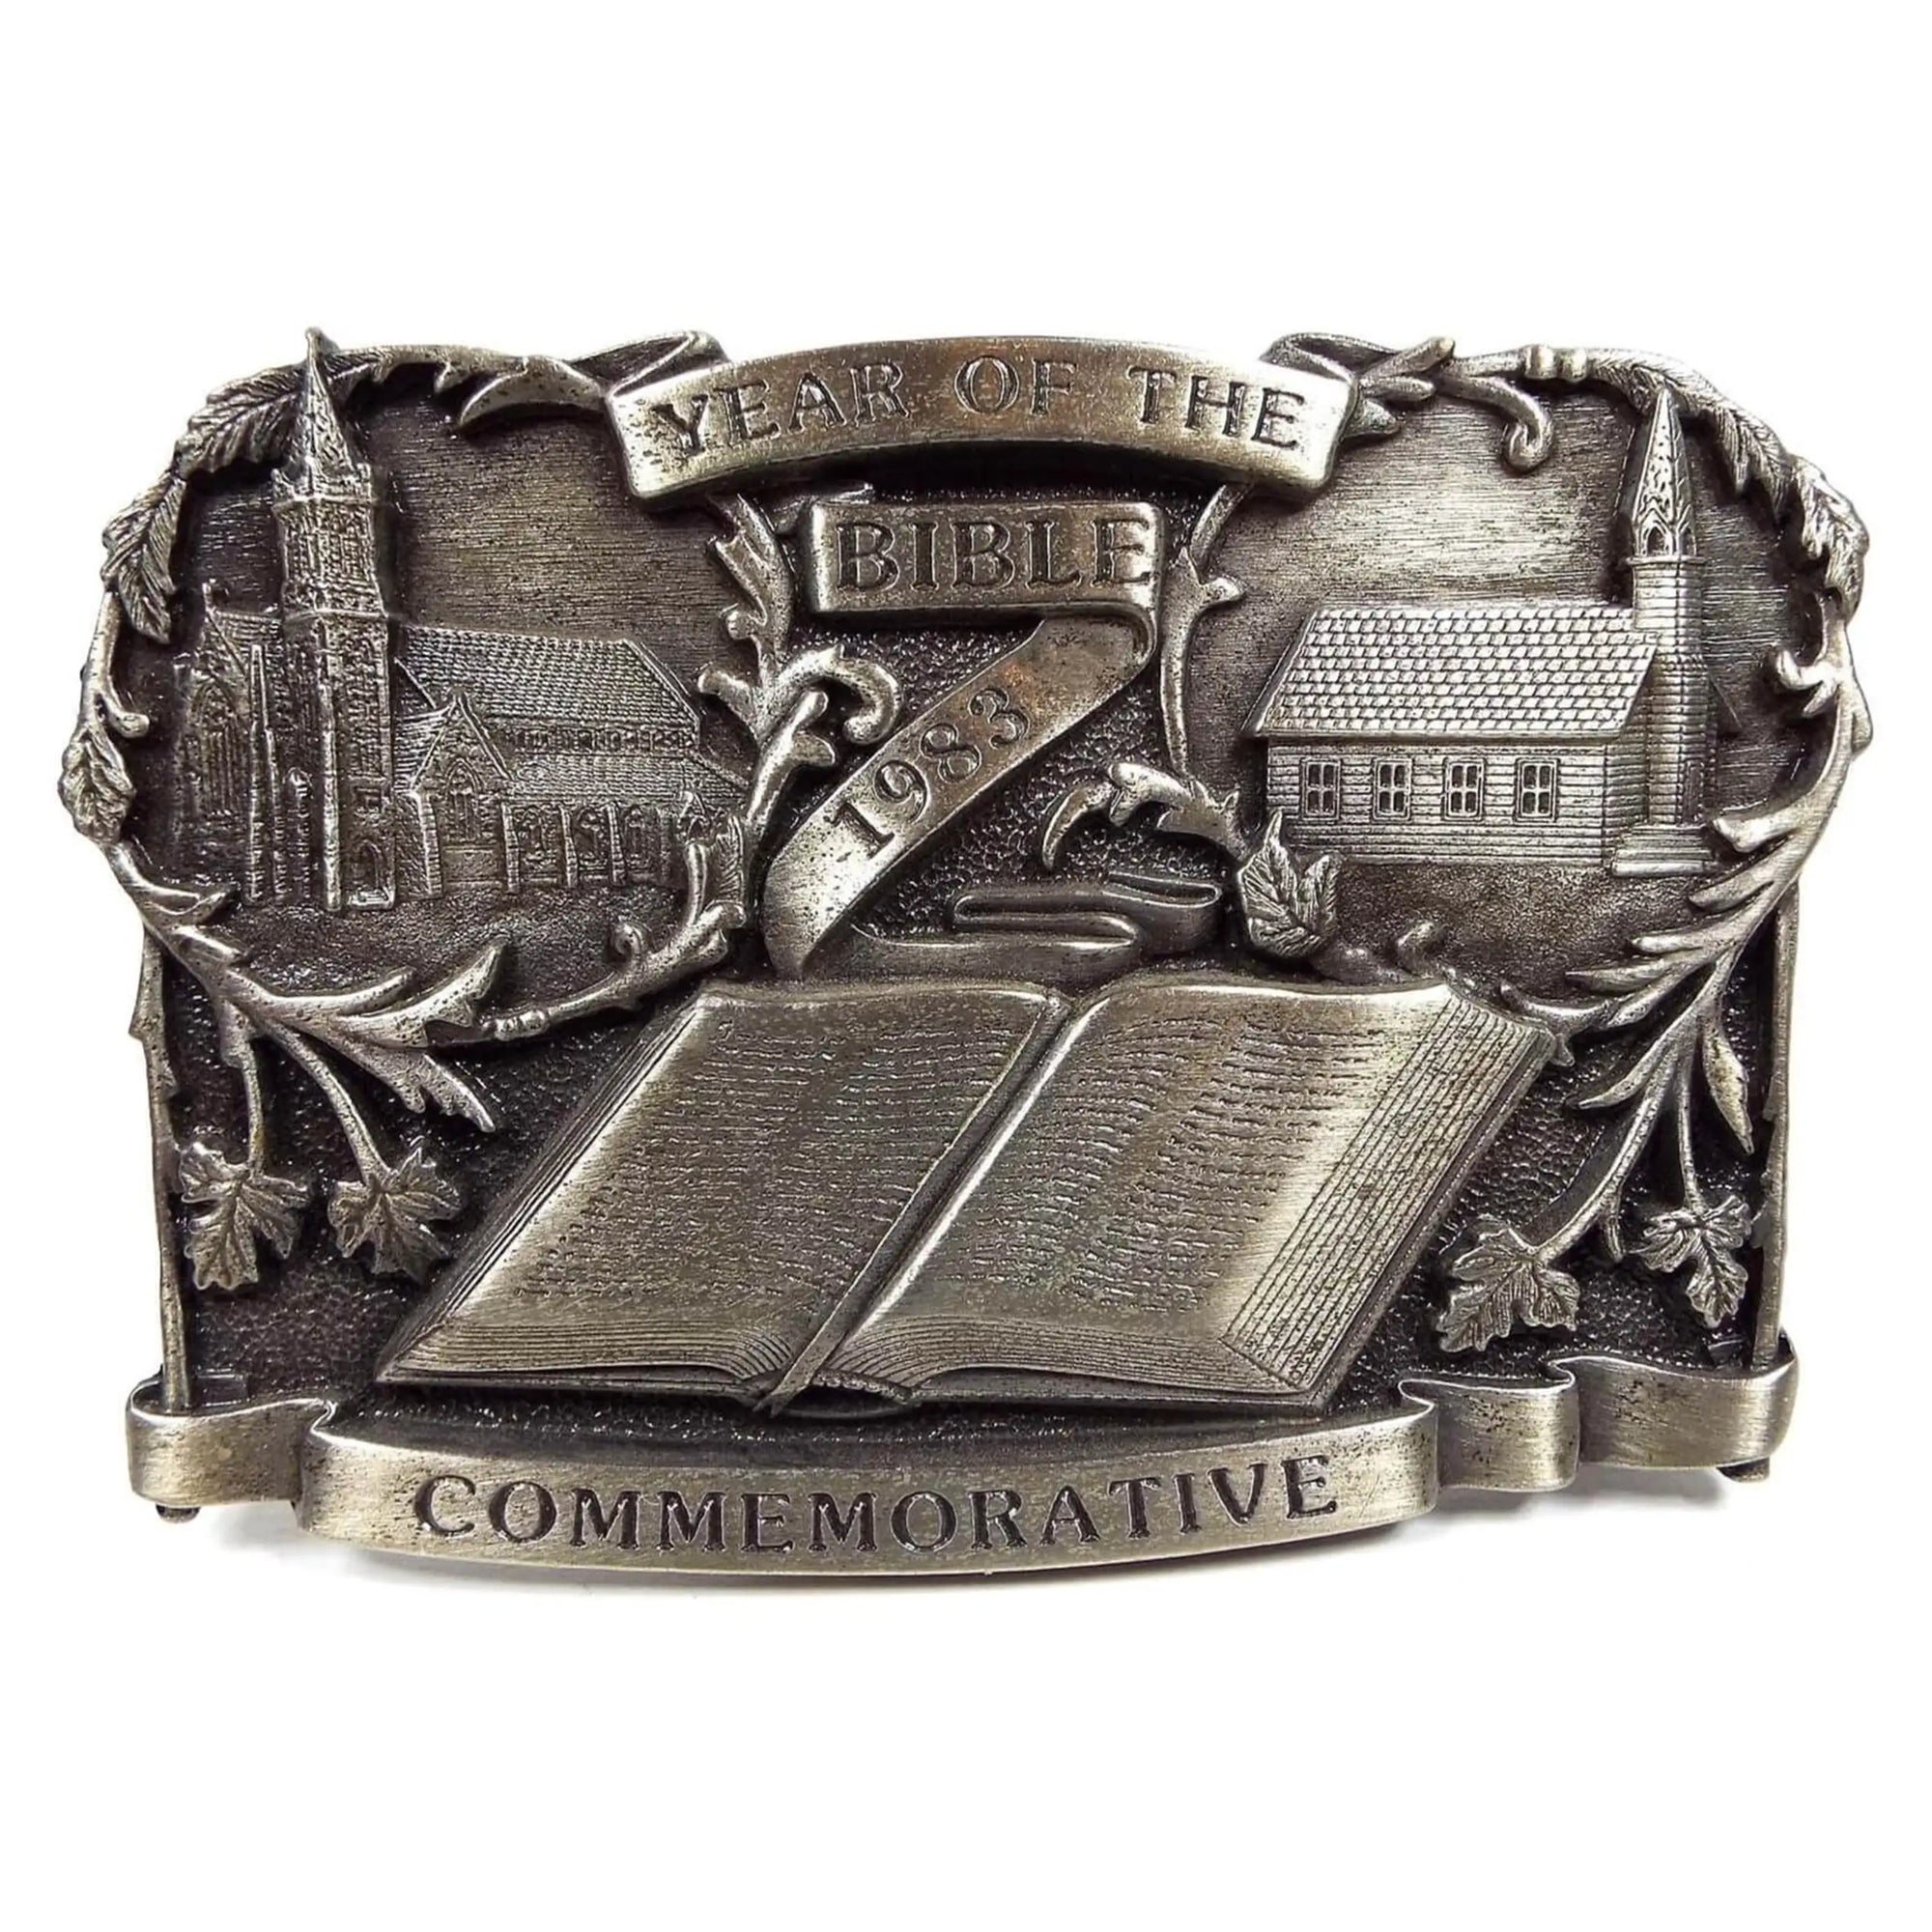 Front view of the retro vintage Bergamot Bible commemorative belt buckle. It says Year of the Bible 1983 and has a depiction of two churches and an open bible on it. It is pewter gray in color.